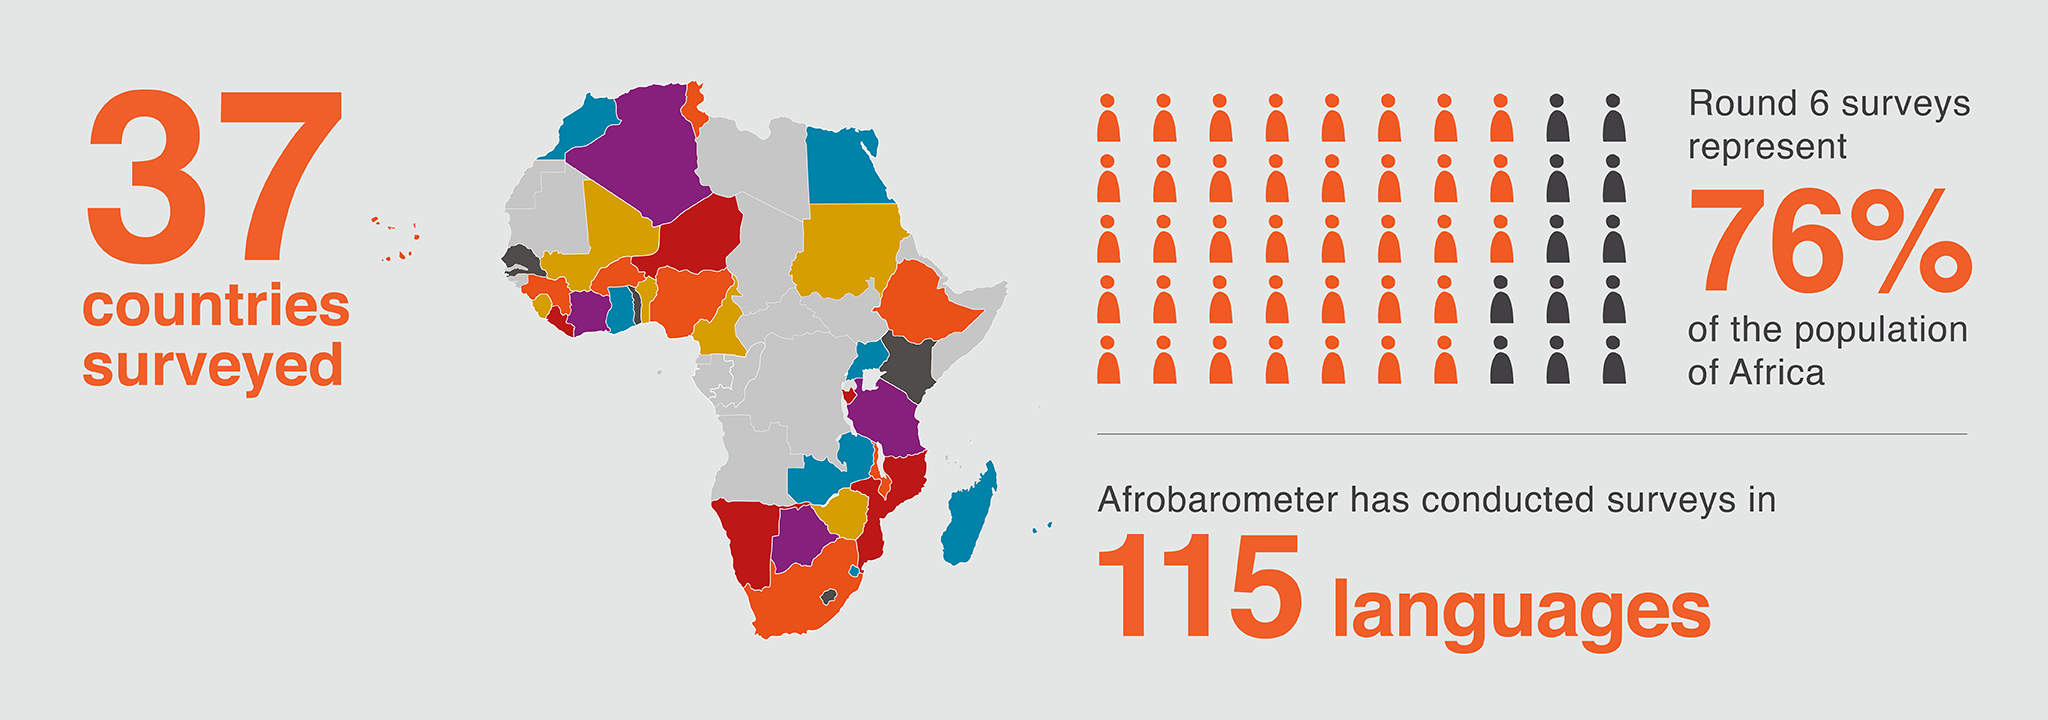 Infographic on Afrobarometer